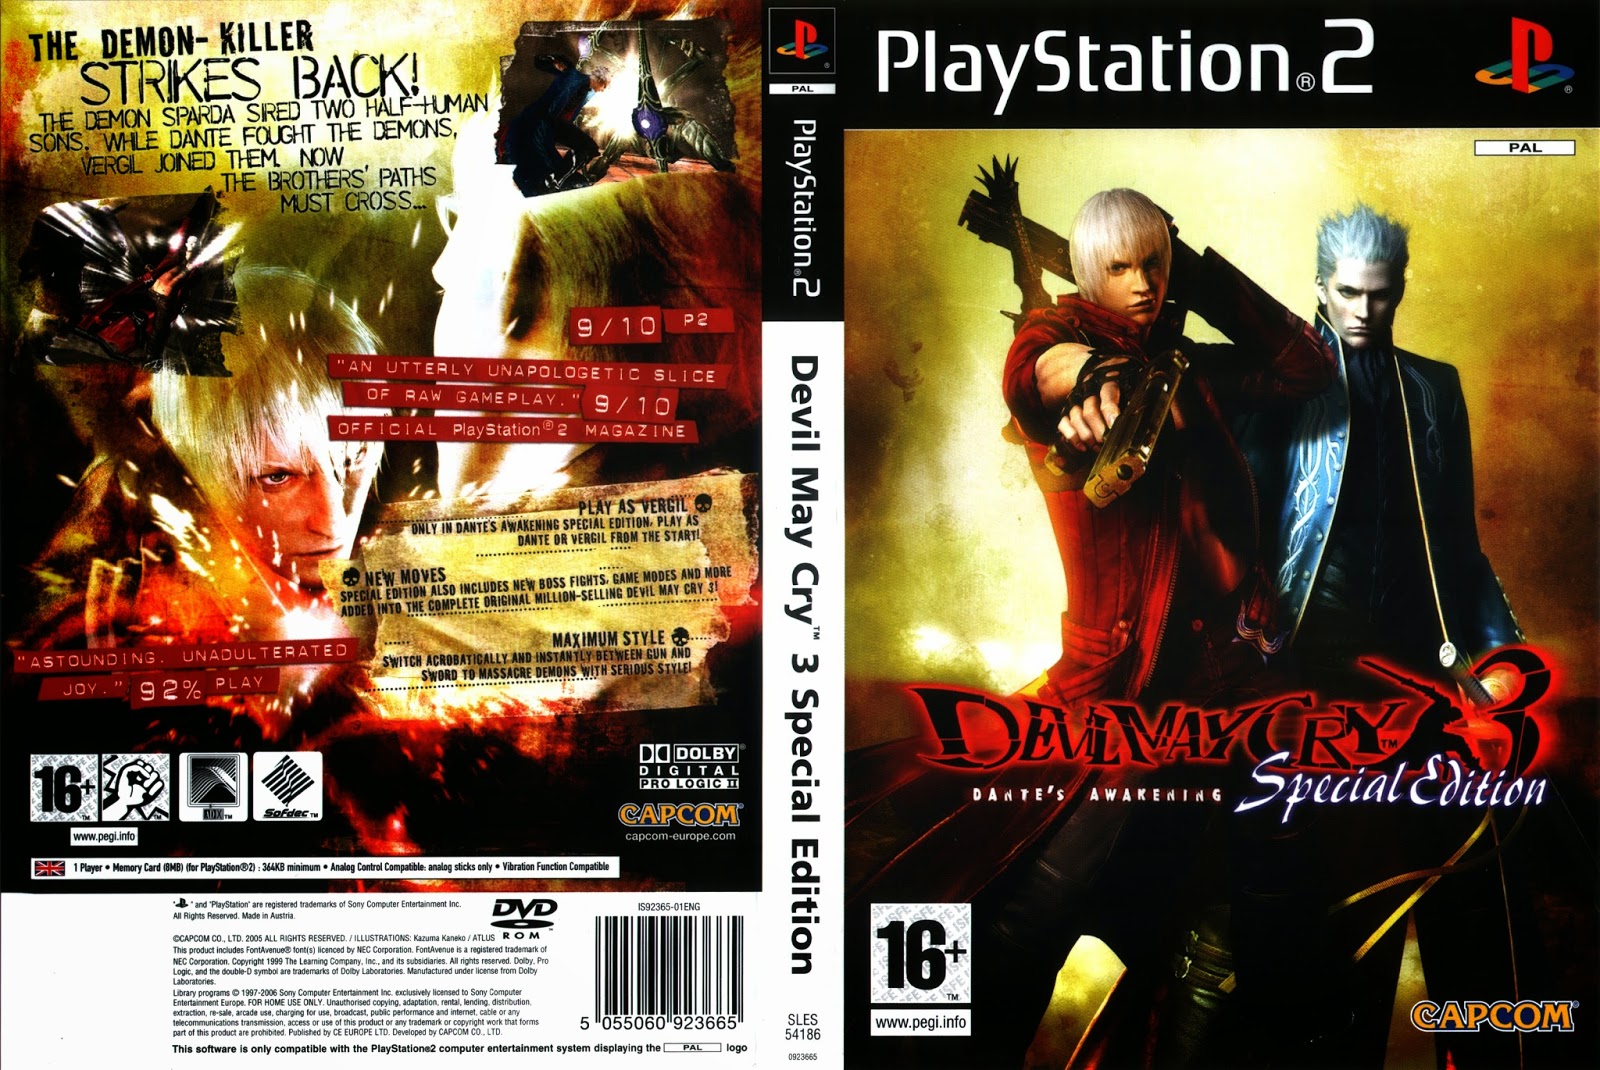 Ps3 devil may. Devil May Cry 3 PLAYSTATION 2 обложка. Devil May Cry 3 ps2 диск. DMC 3 ps2. Devil May Cry 3 Special Edition ps2.